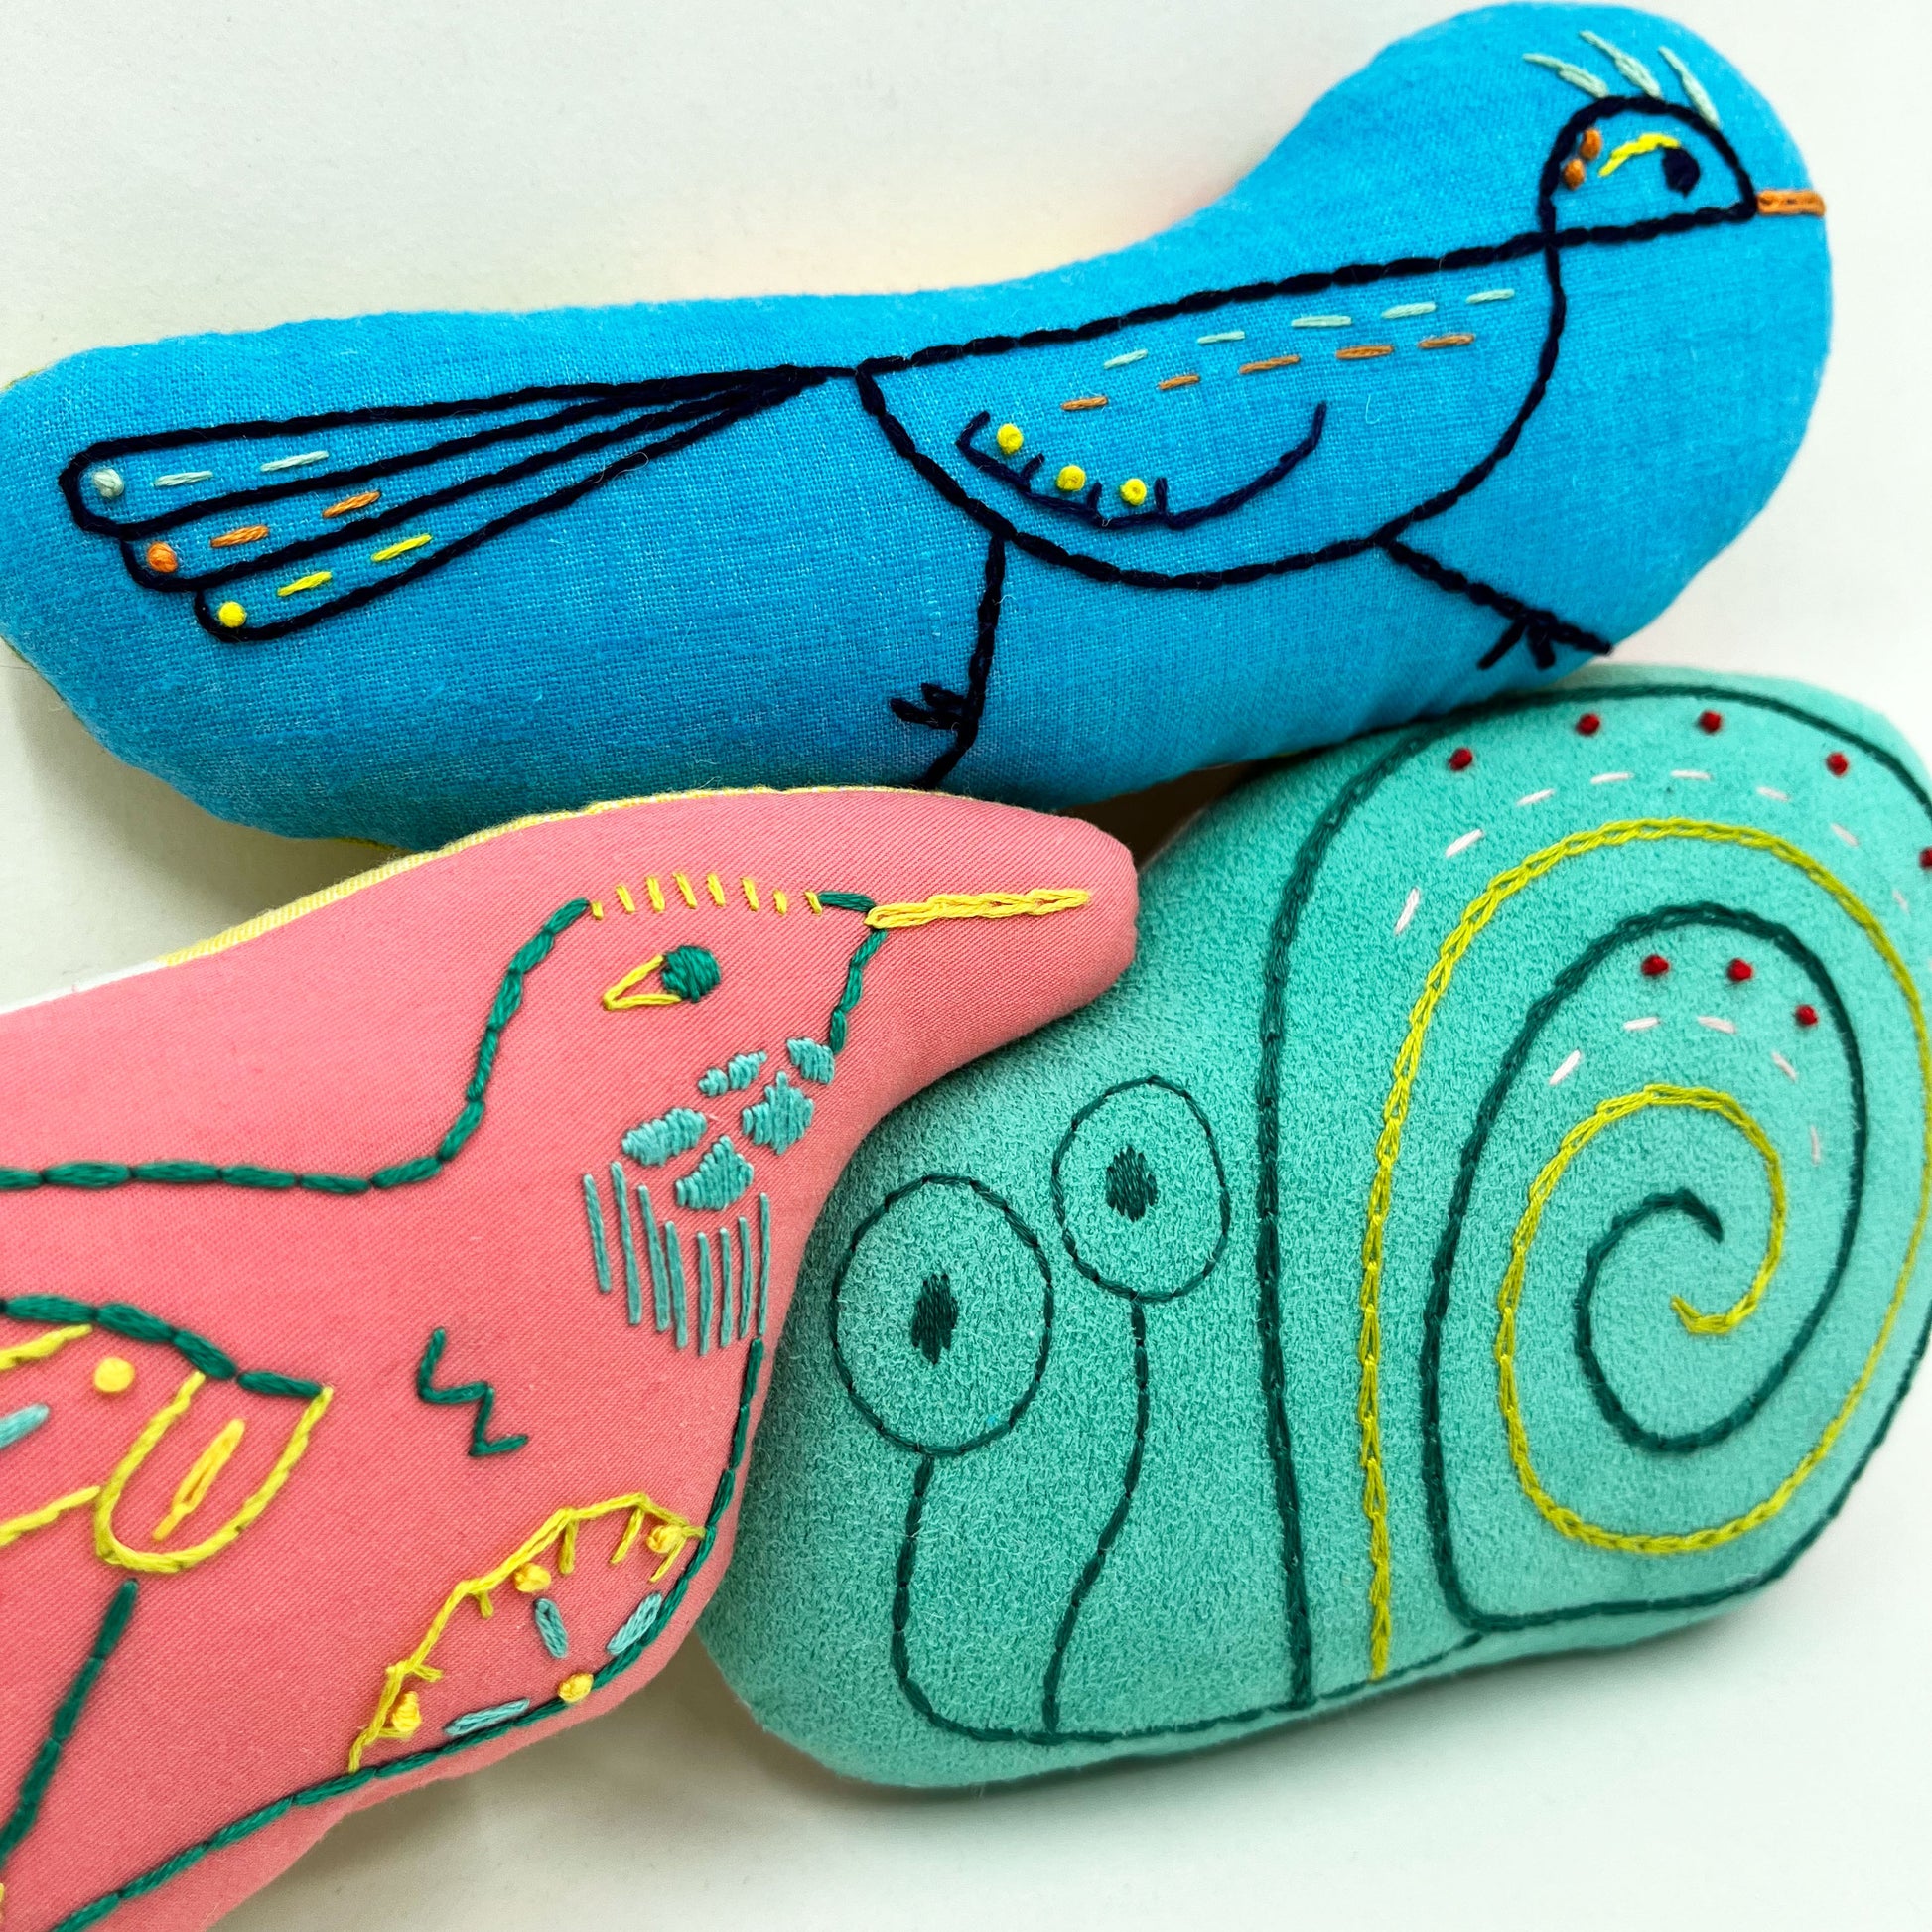 a group of colorfully hand embroidered stuffed pillow animals-a roadrunner, snail and hummingbird in coral, aqua and blue fabric,  with a white background